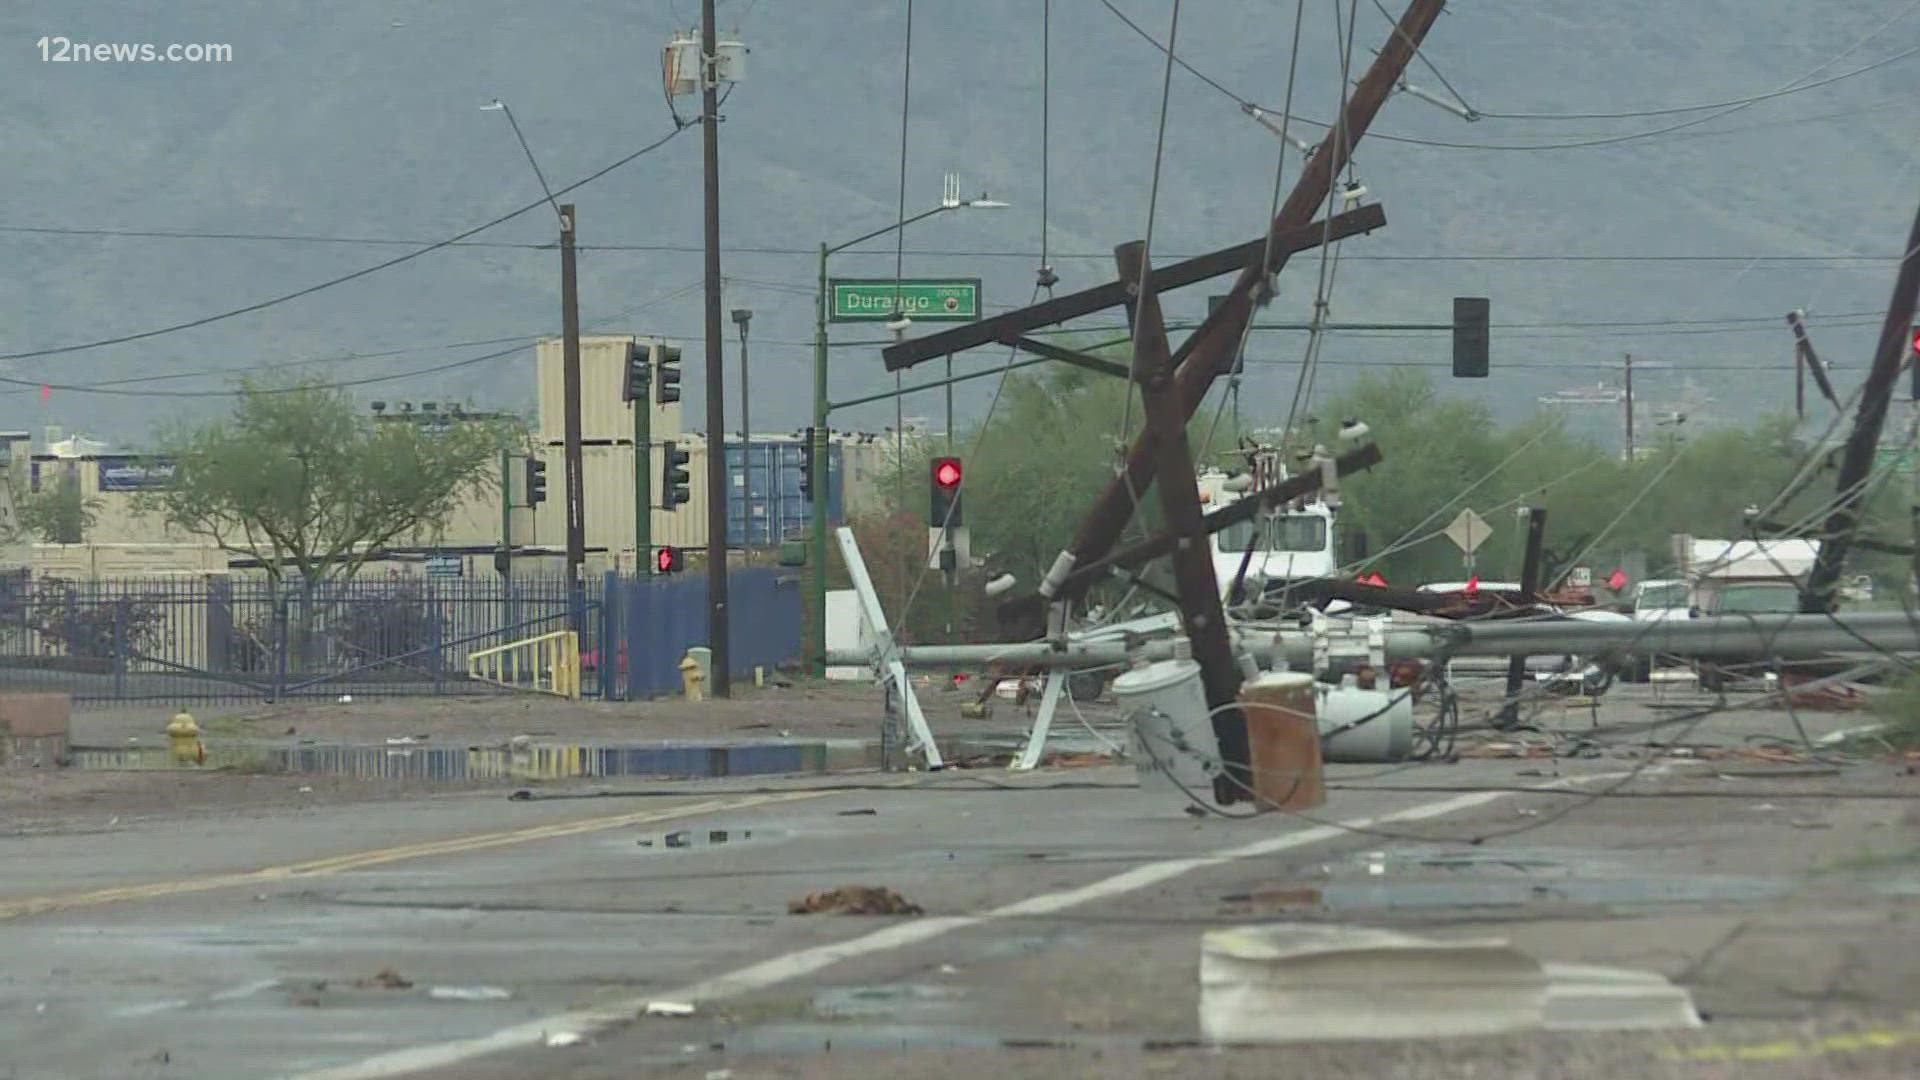 Nearly 2,000 residents experienced power outages in Metro Phoenix after strong storms knocked down power lines.